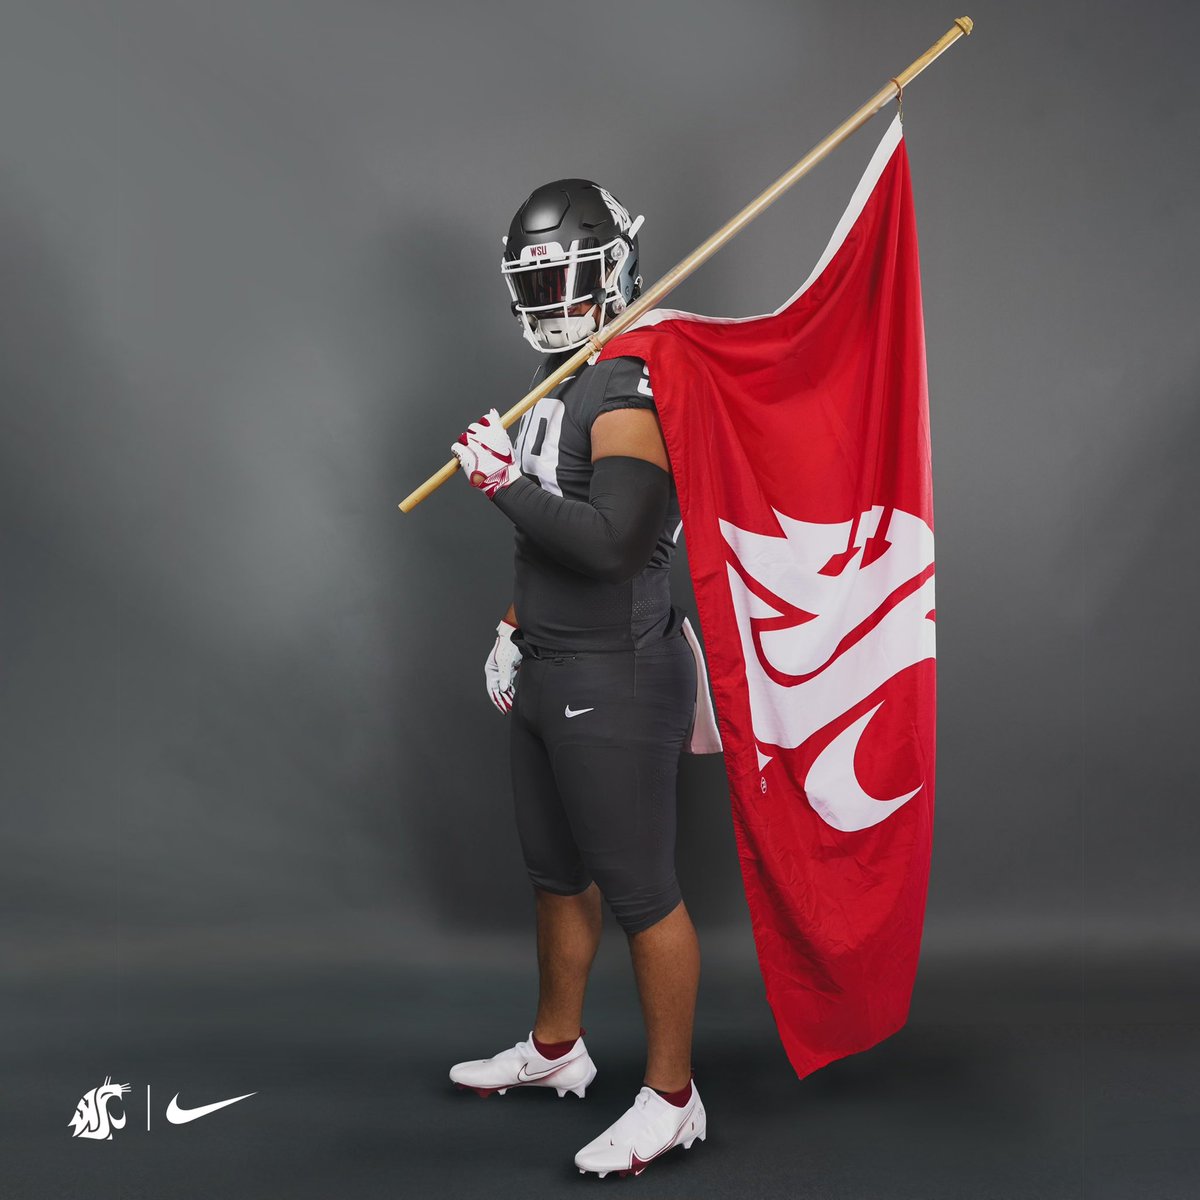 After a great conversation with @CoachK2x4 I have found a home at Washington State. All Glory to God. GO COUGS!!! @missionfootball @diablocjohnson @rhino86er @PTPSPORTS1 @WSUCougarFB